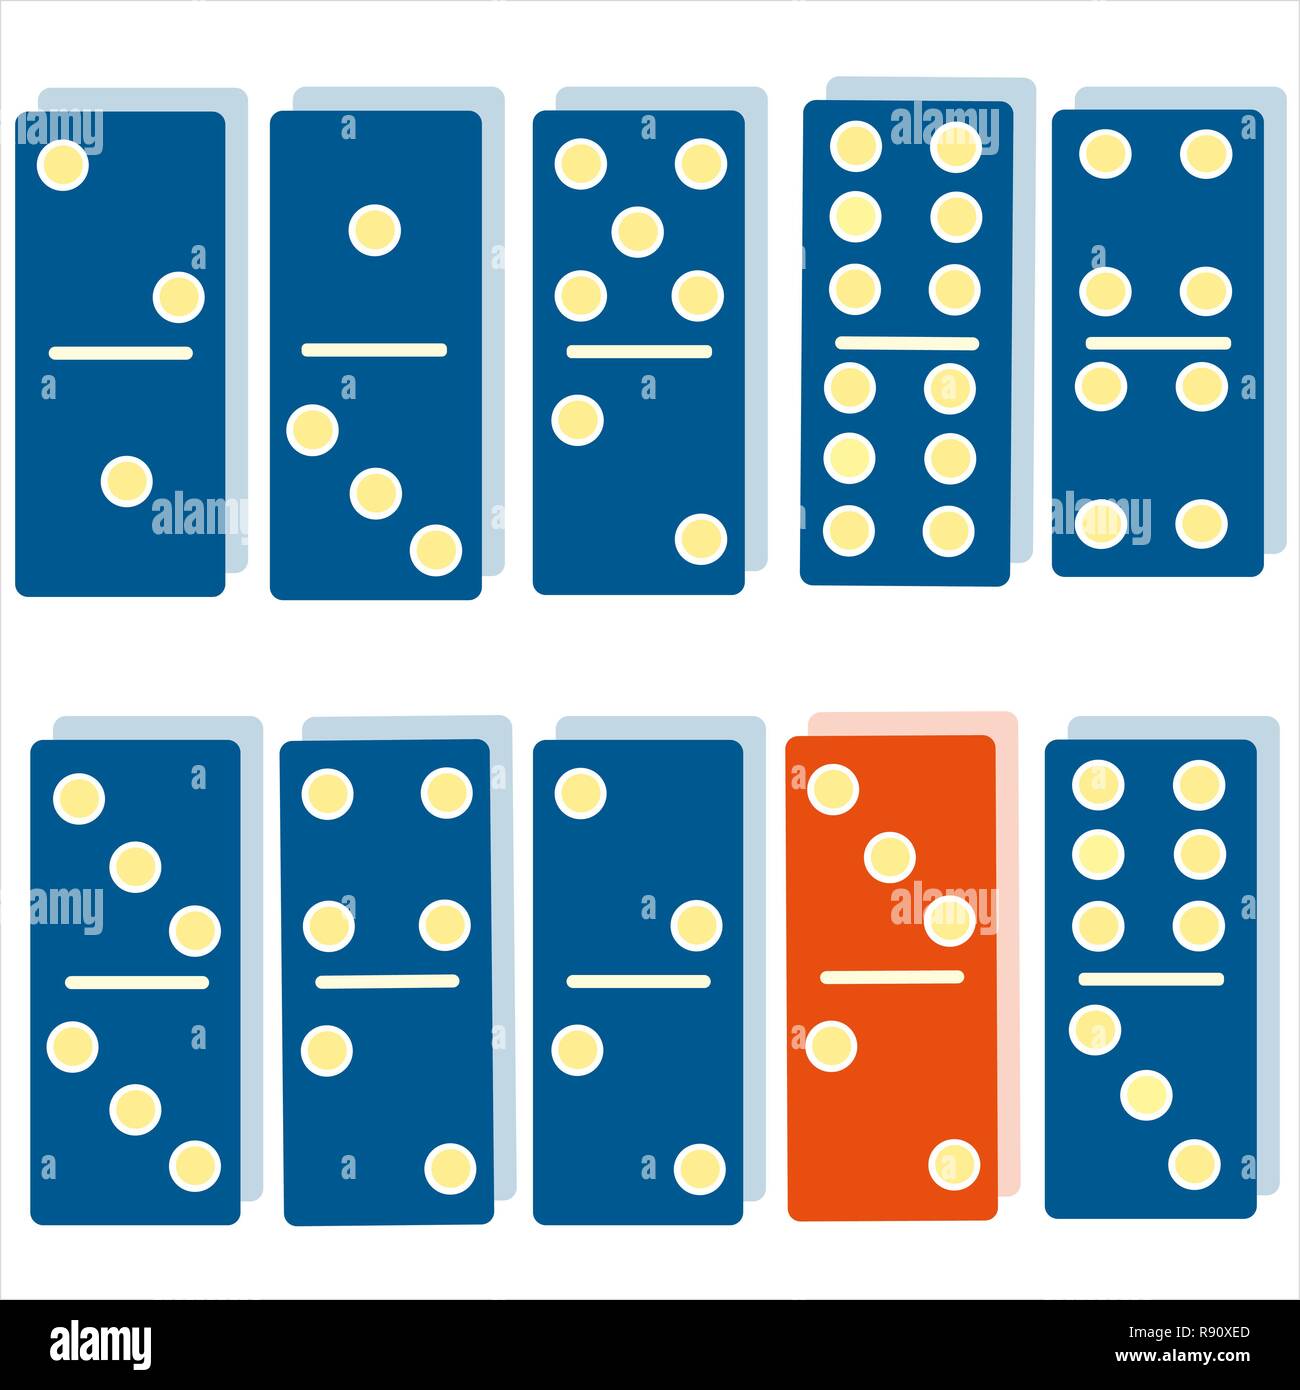 Premium Vector  Set of isolated white classic dominoes for the game  collection of simple domino chips